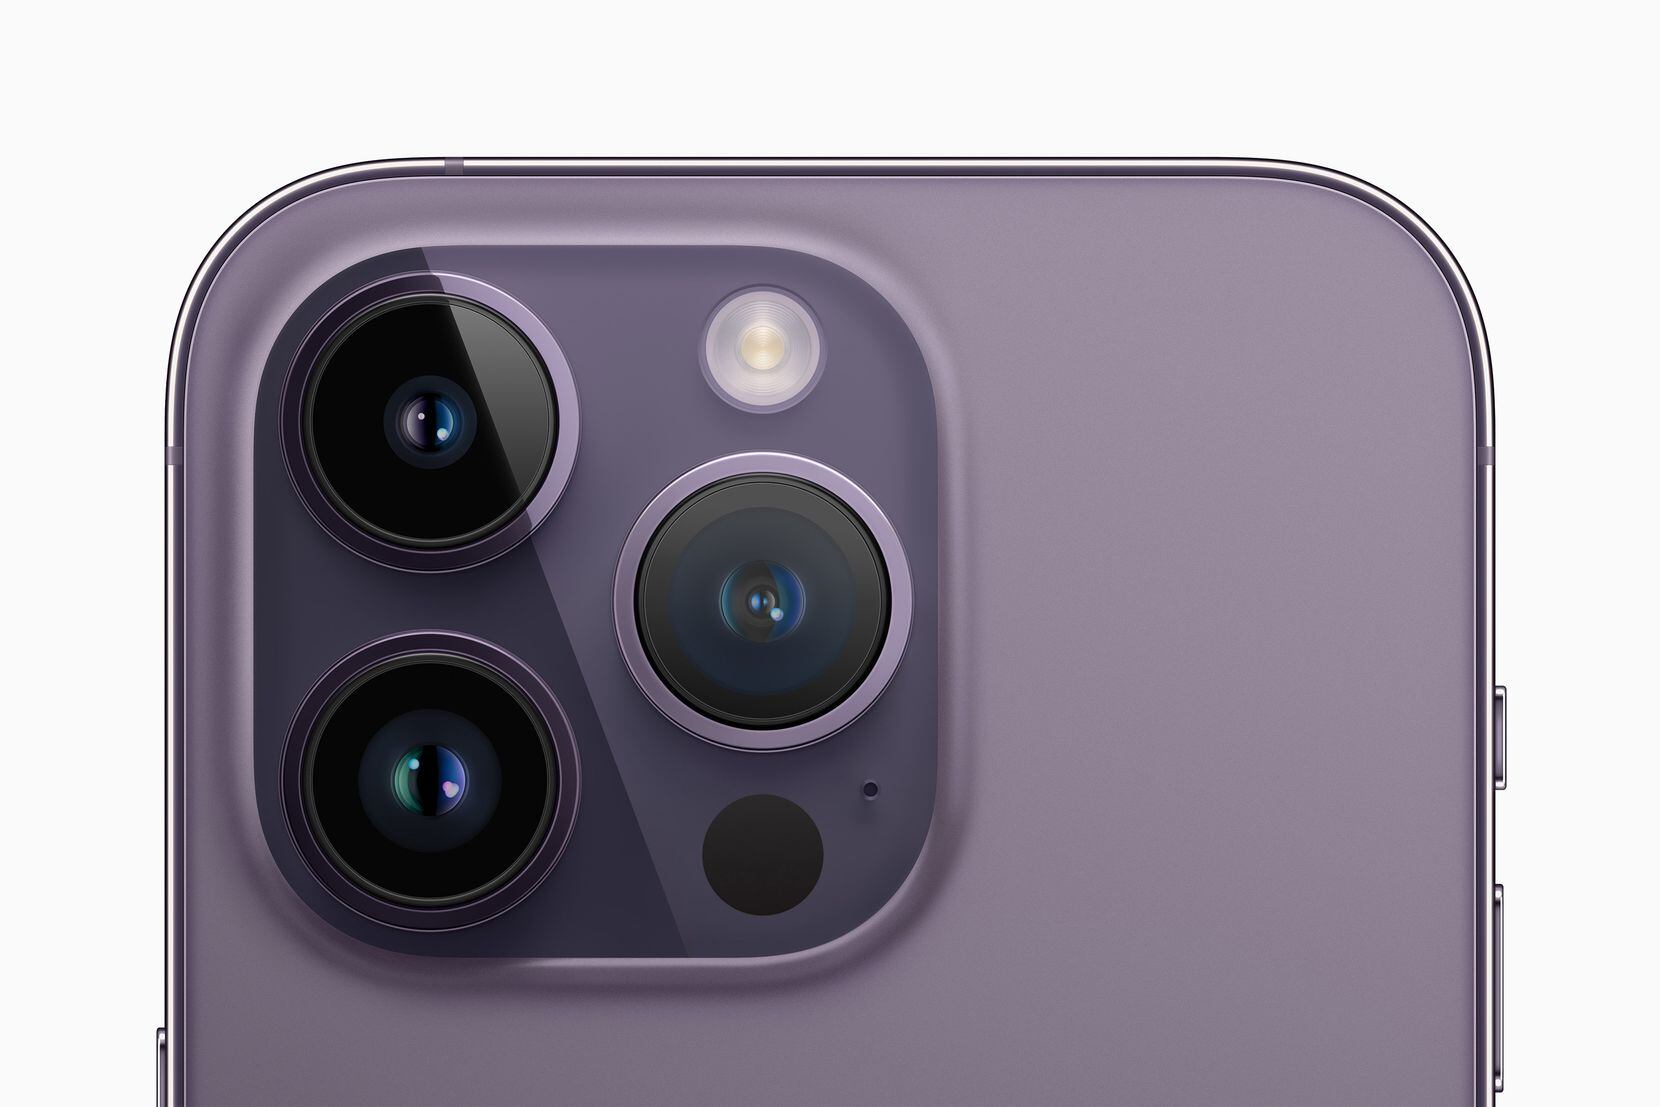 The main camera of the Apple iPhone 14 Pro has a 24mm wide-angle lens with ...